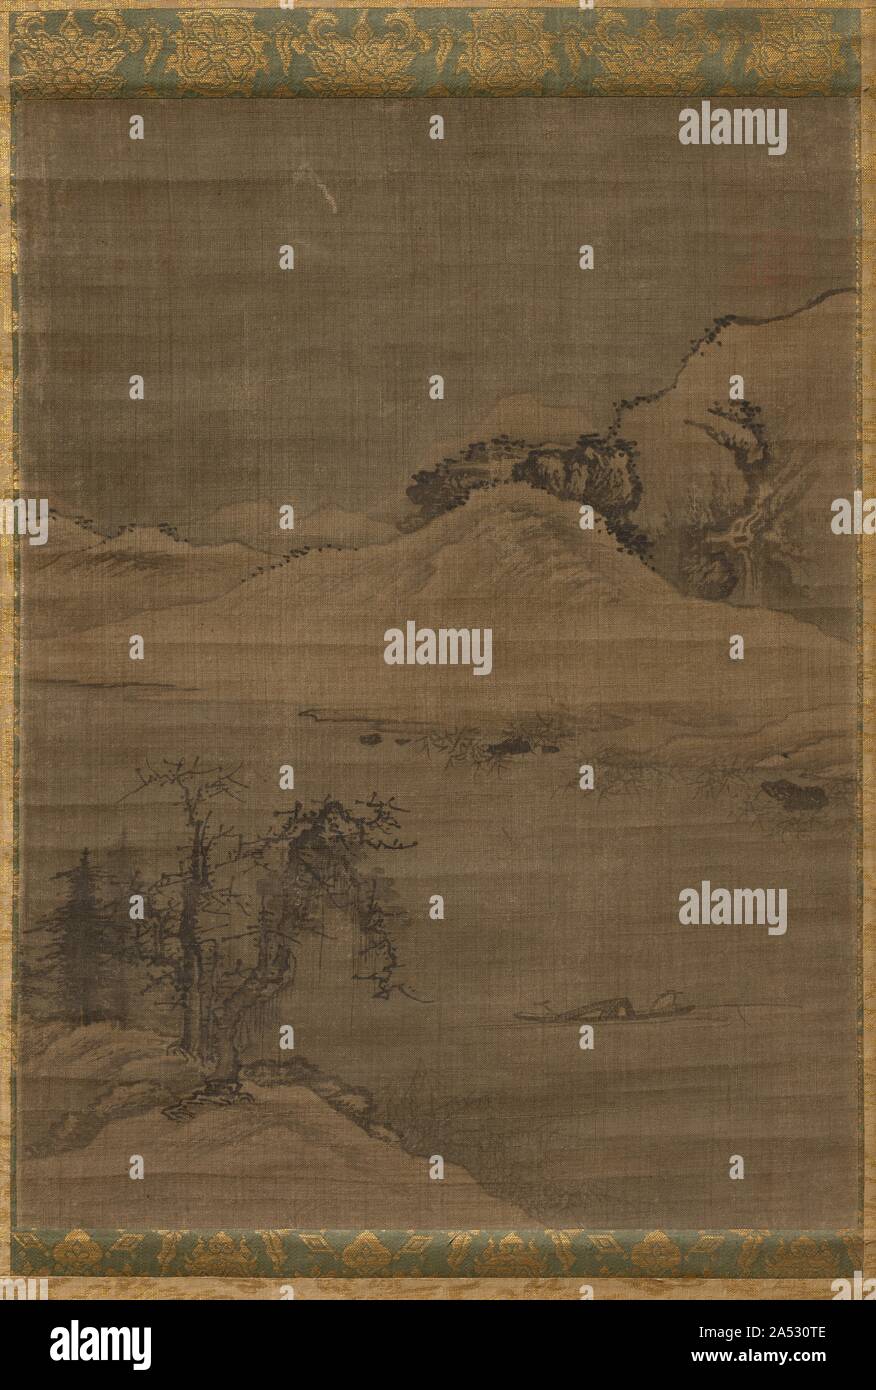 Landscape with Fishermen, 1600s. Surviving paintings of the early Choson period in Korea, while not numerous, provide modern viewers with a consistent ensemble of subject matter, painting formats, and stylistic approaches. Along with landscape painting, animal, bird, and flower paintings, a few portraits, grapes, bamboo, figural compositions, and kyehoe-do (commem-orative rites scenes) make up the basic repertoire of subjects. The late 15th- and 16th-century landscapes that have survived, however, are modest in format. Korean painters preferred to work in a restricted compositional arena.  The Stock Photo